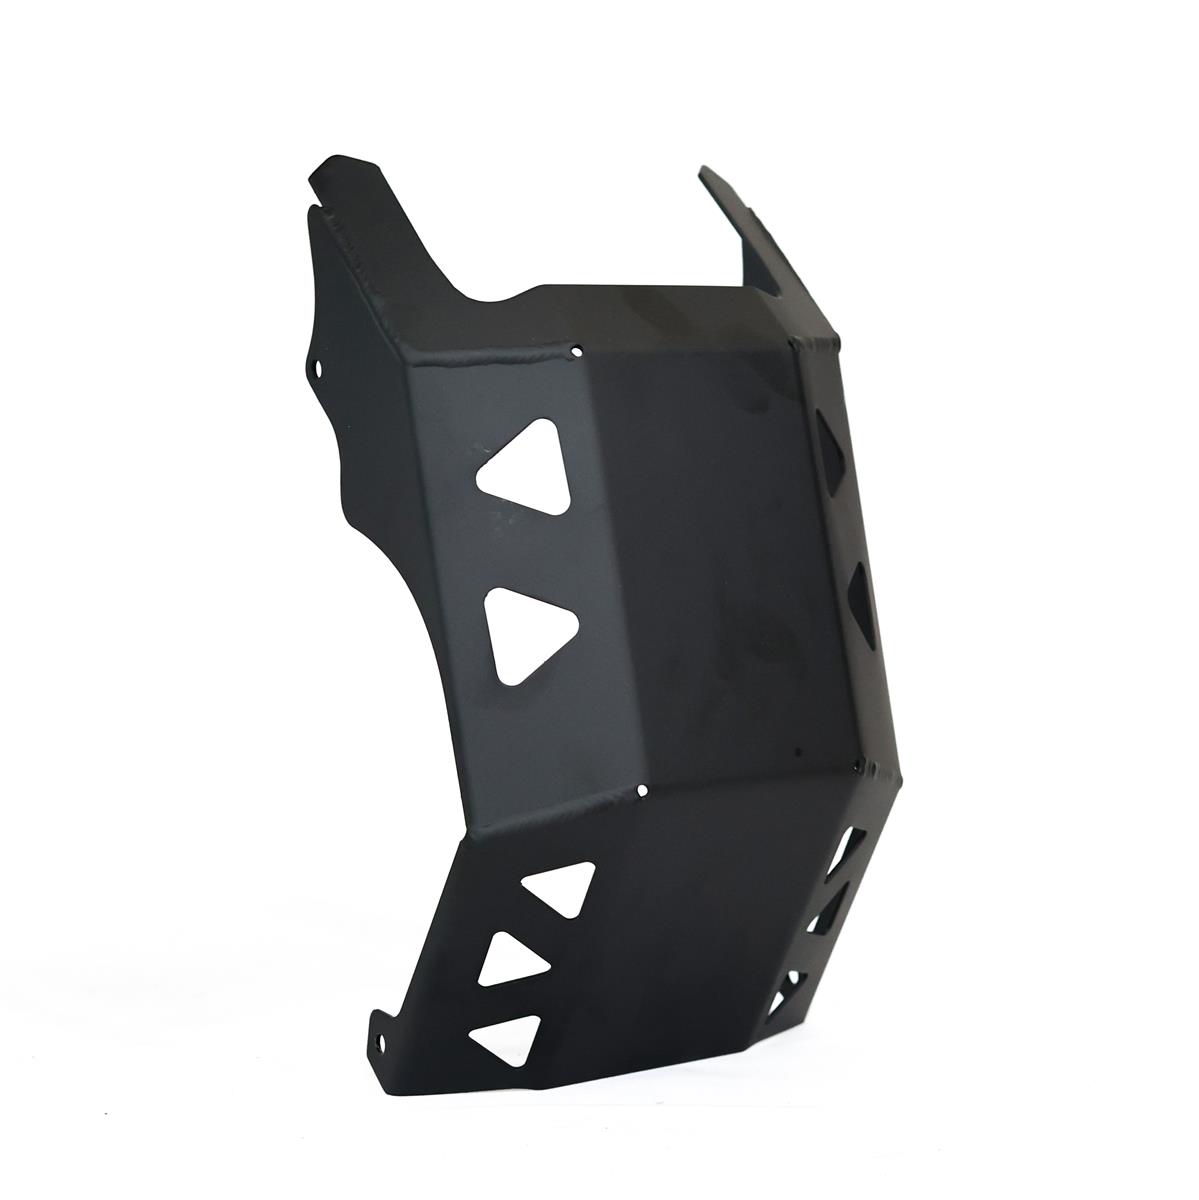 Engine Guard In Black Aluminum For Sting TL3000 MX And Sting L1e Trail And Enduro